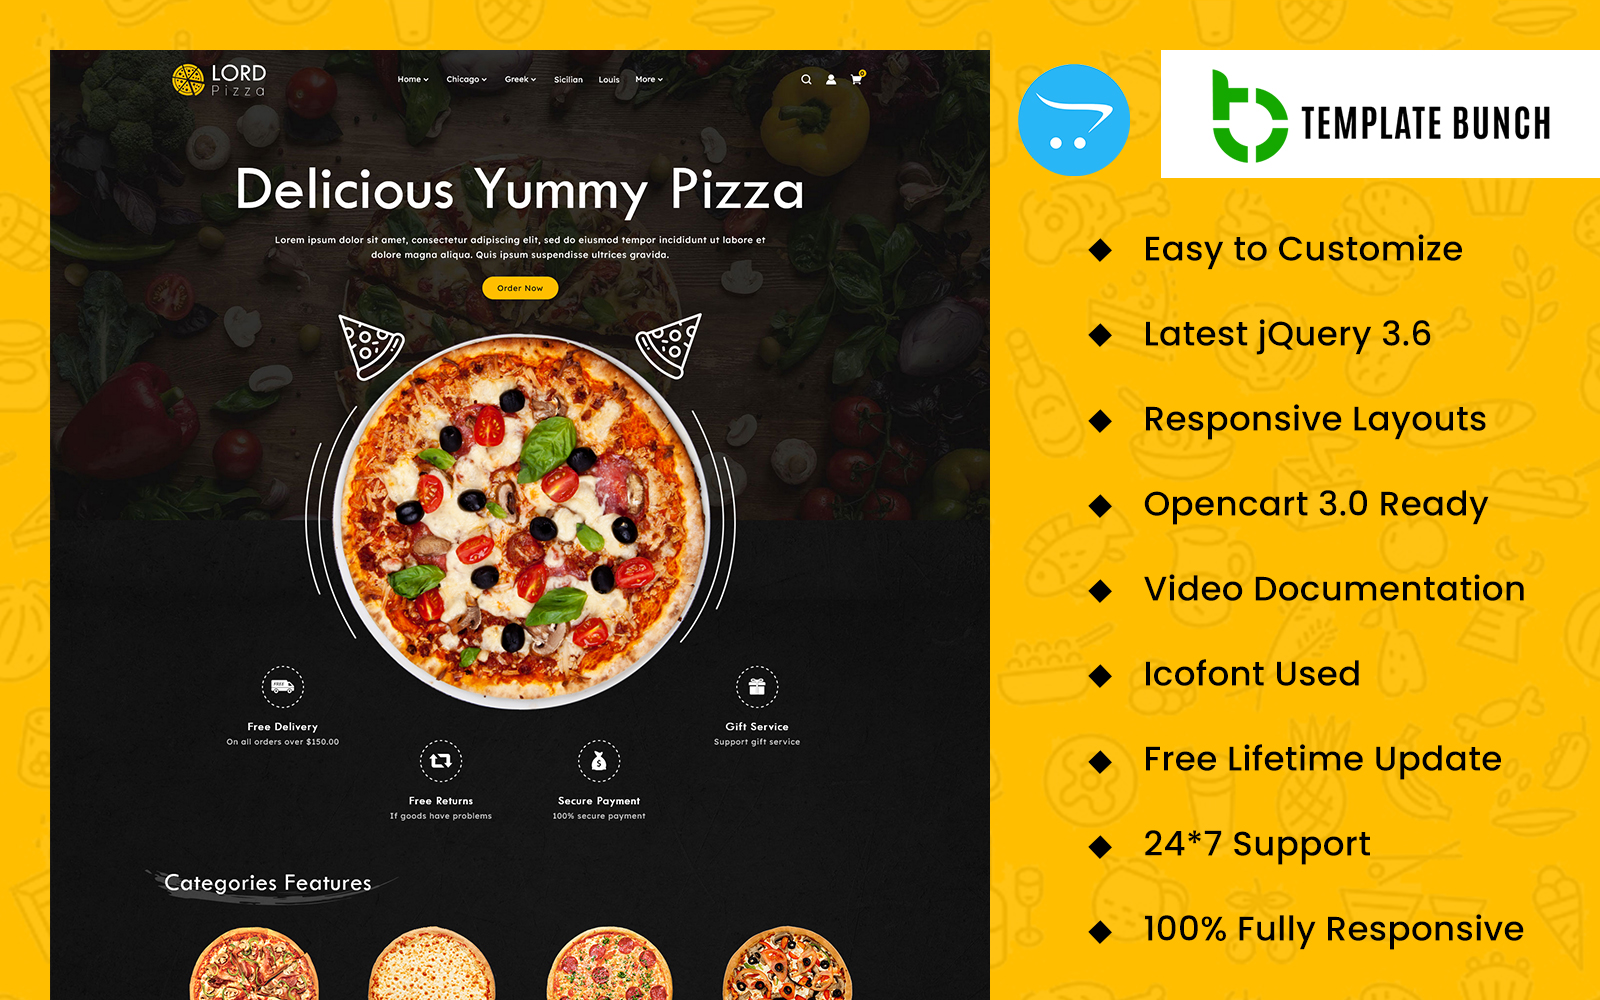 Lord Pizza Store Opencart Responsive Theme for eCommerce